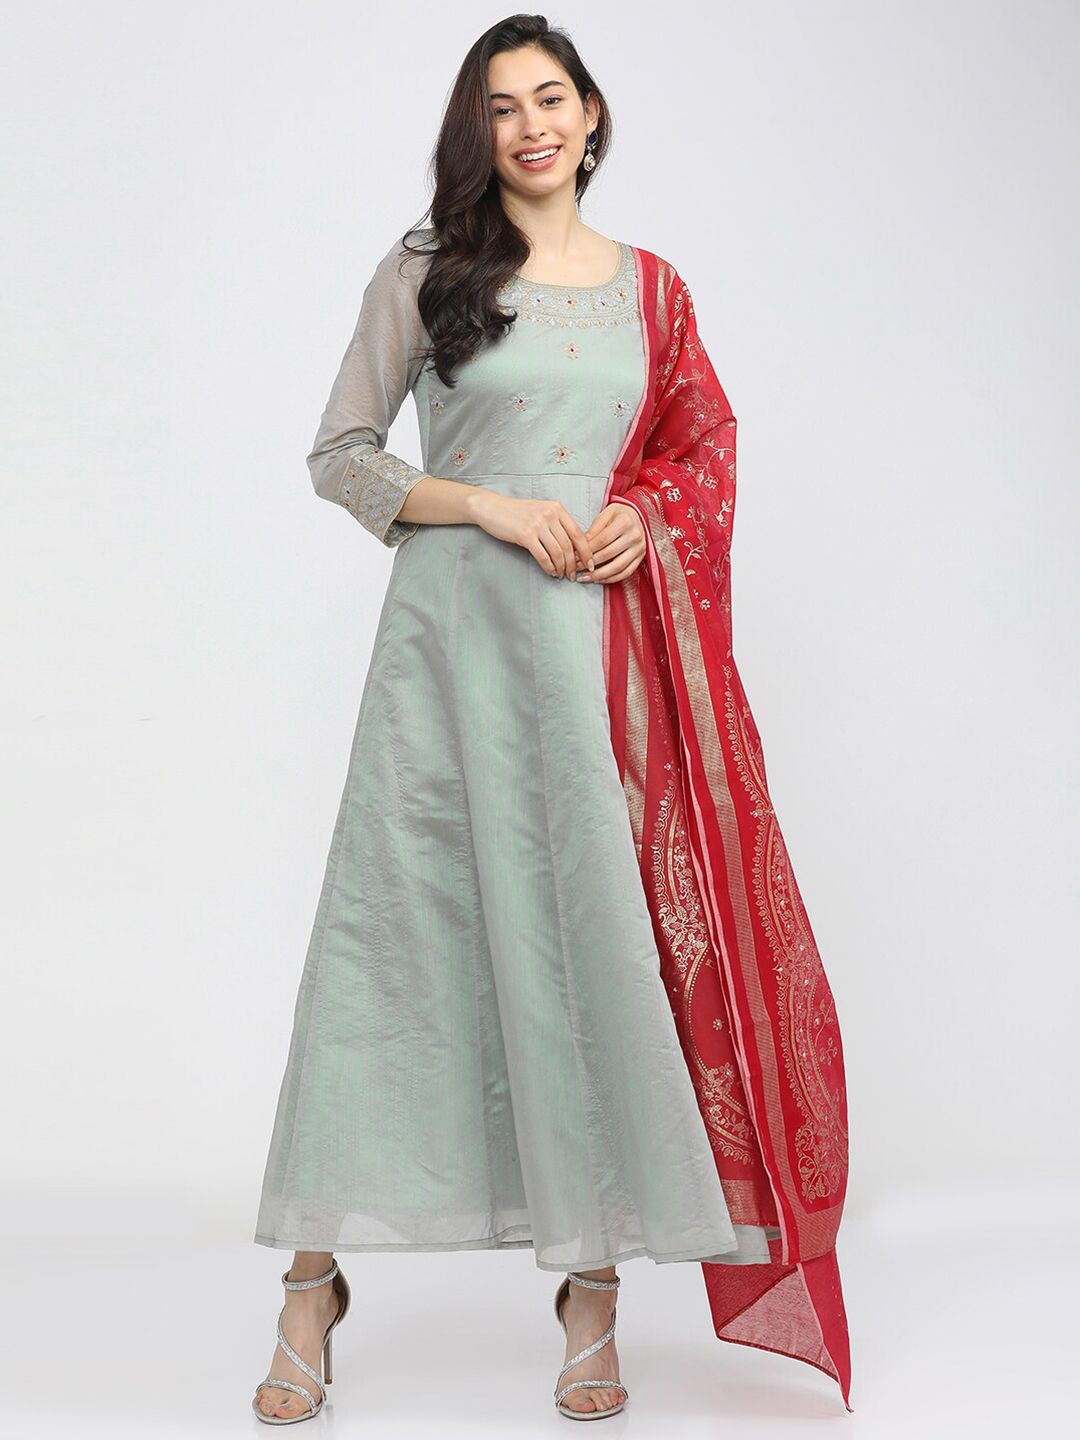 Vishudh Grey Floral Embroidered Ethnic Maxi Dress Price in India